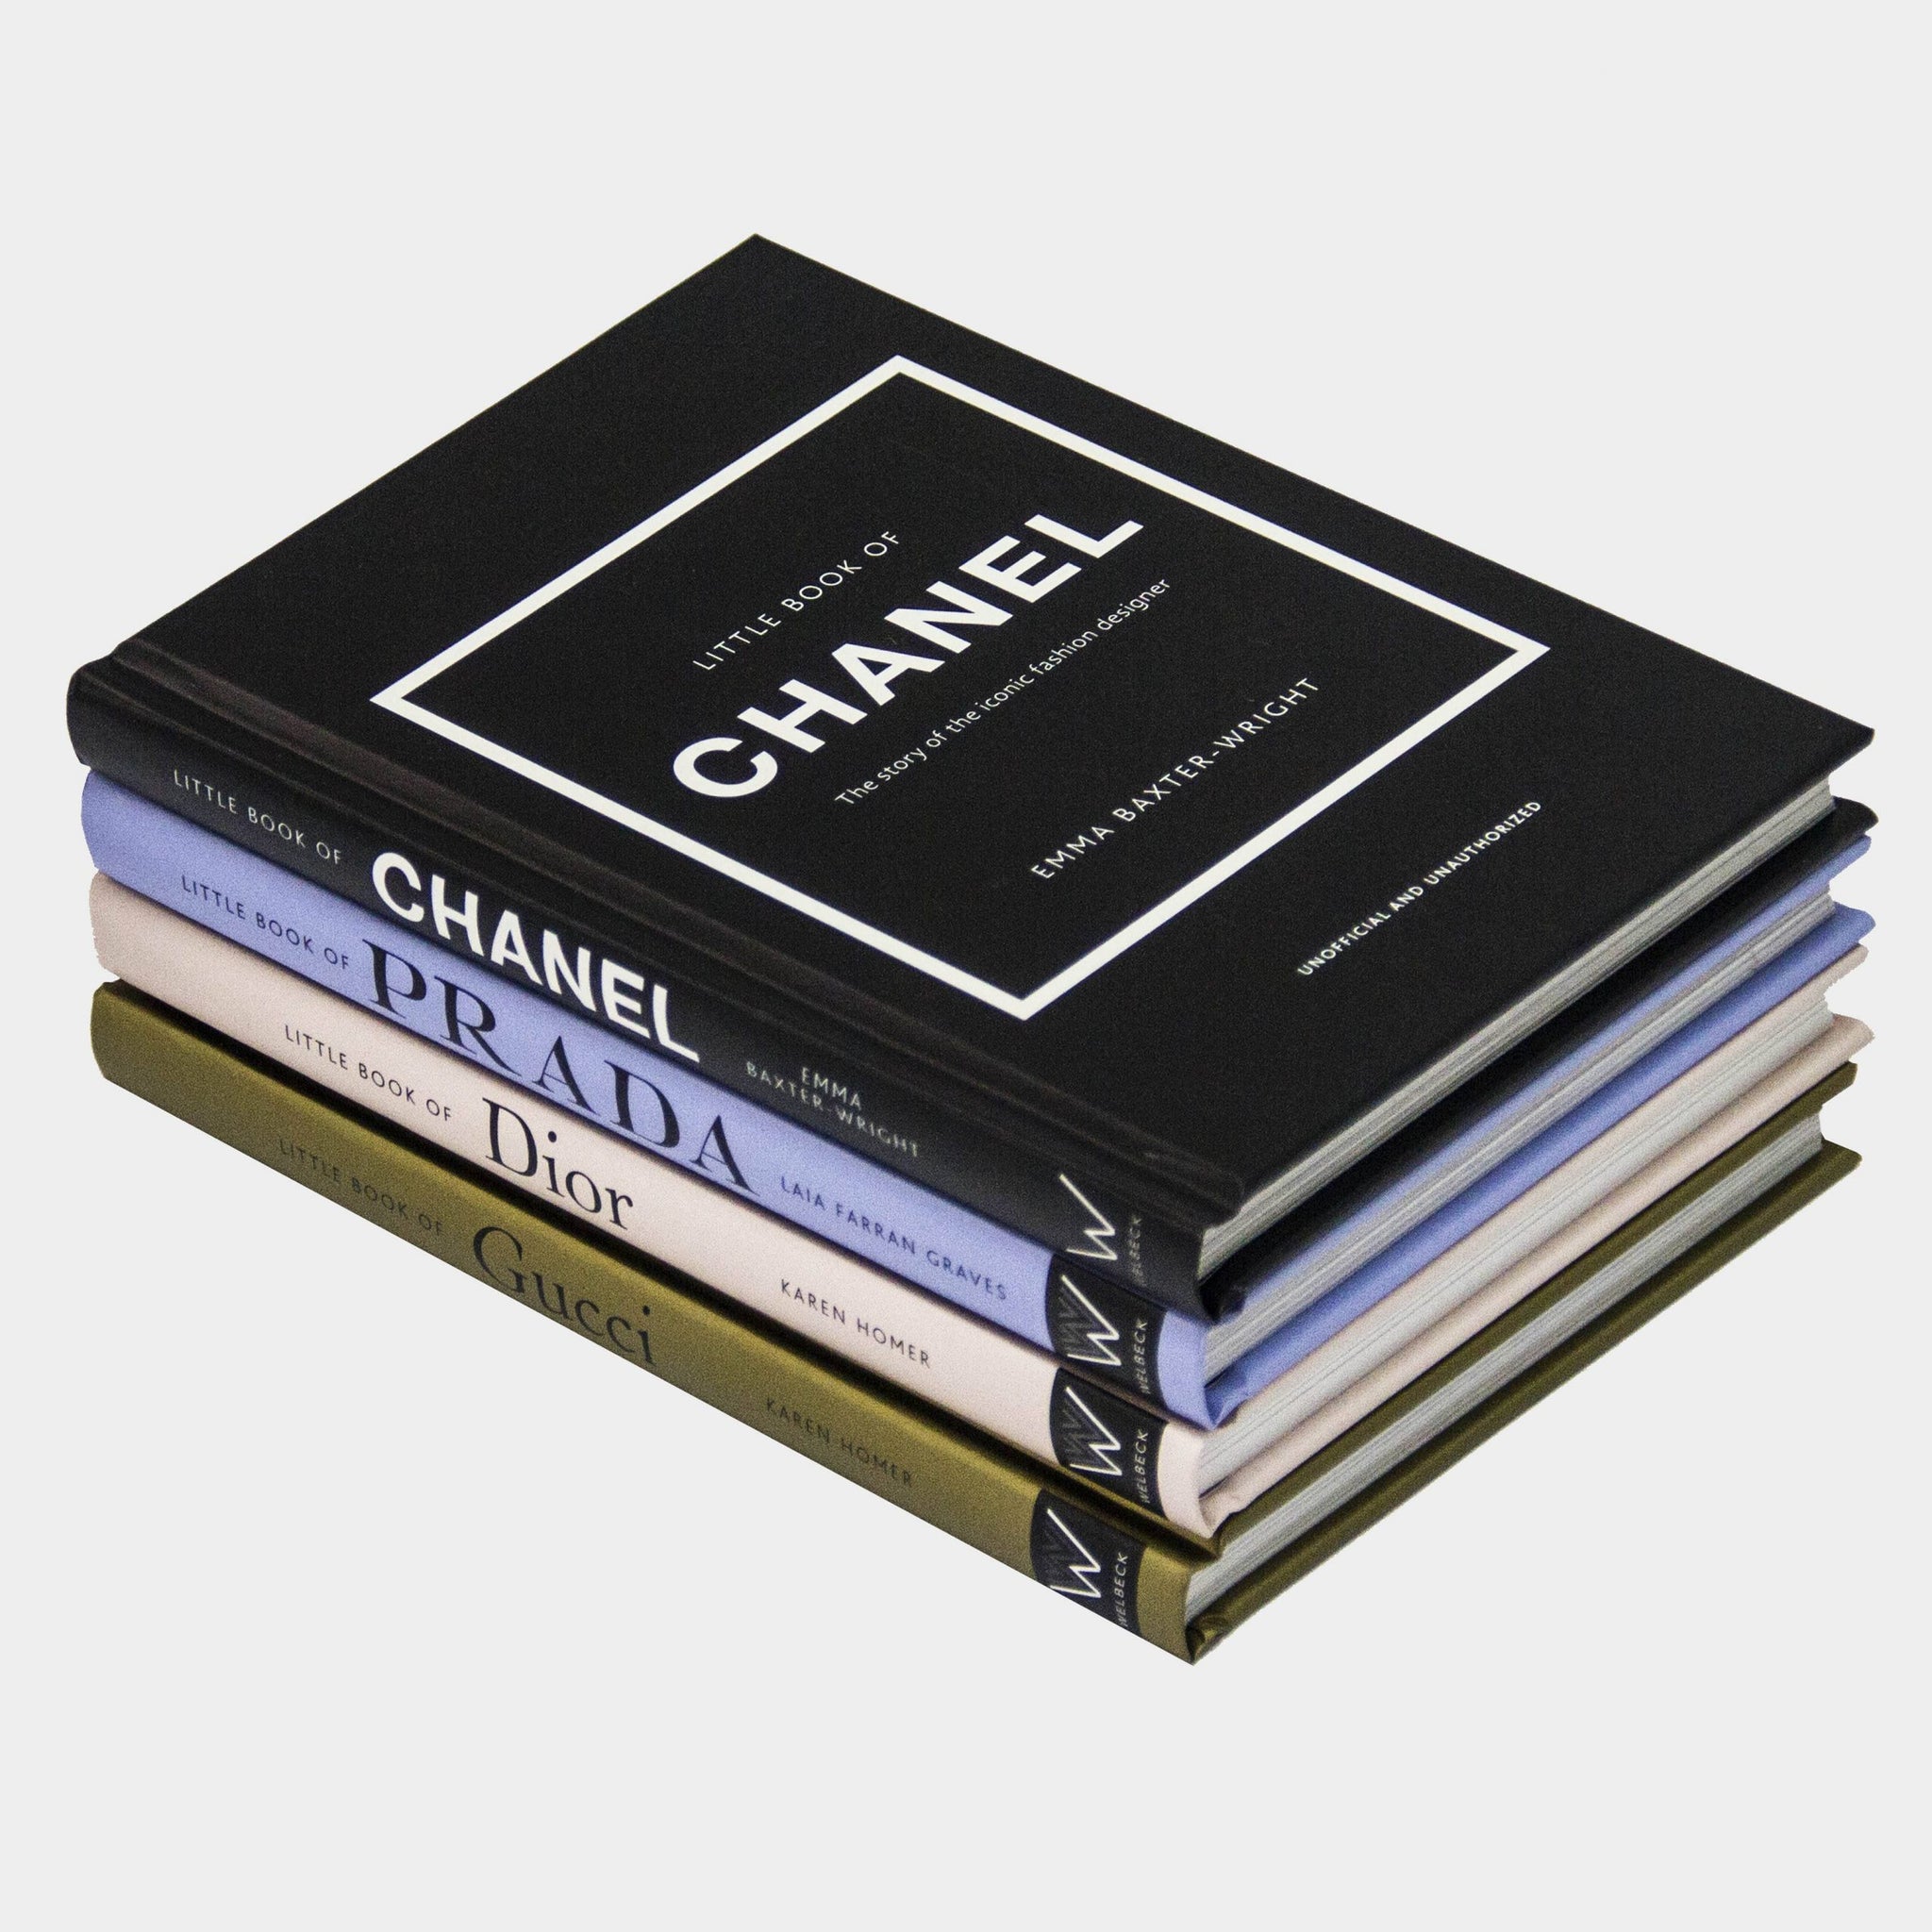 The Little Book of Chanel [Book]